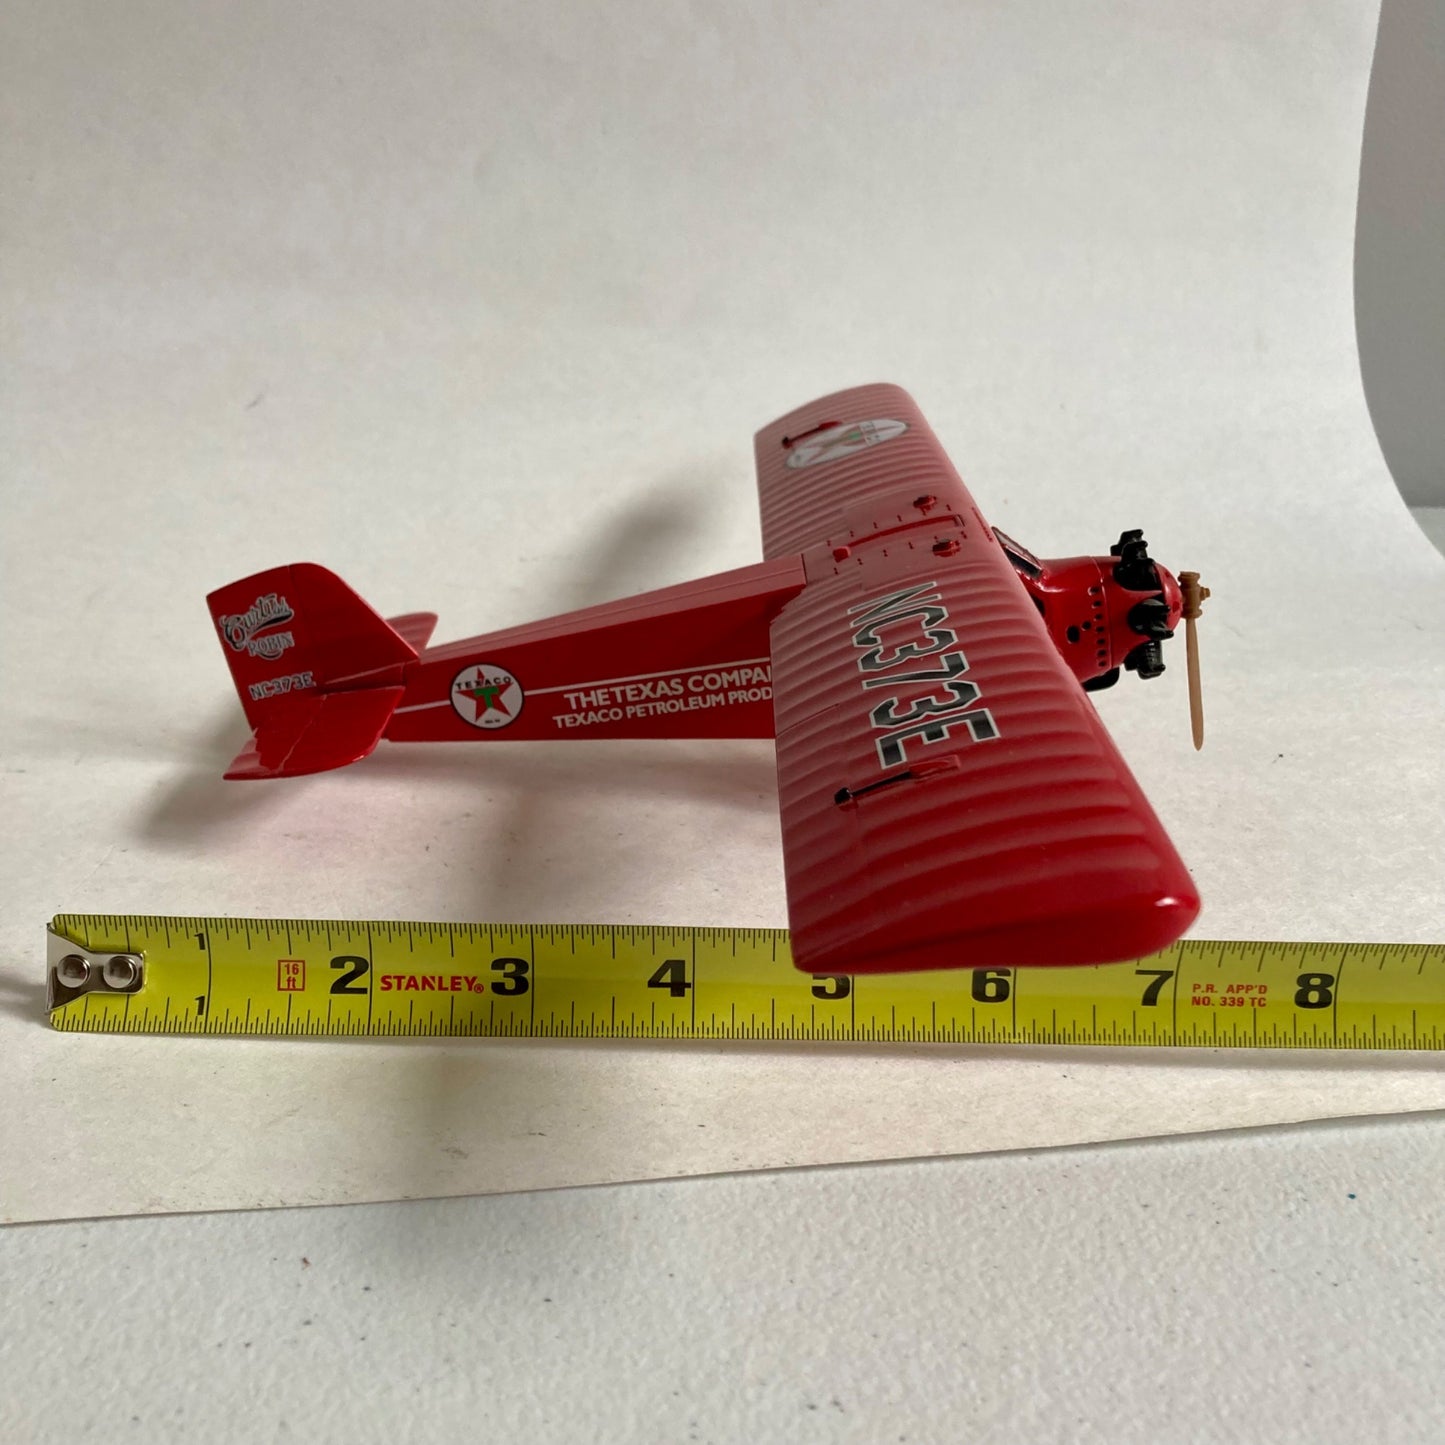 Vintage Wings of Texaco 1929 Curtiss Robin Airplane w/ Box Diecast Coin Bank